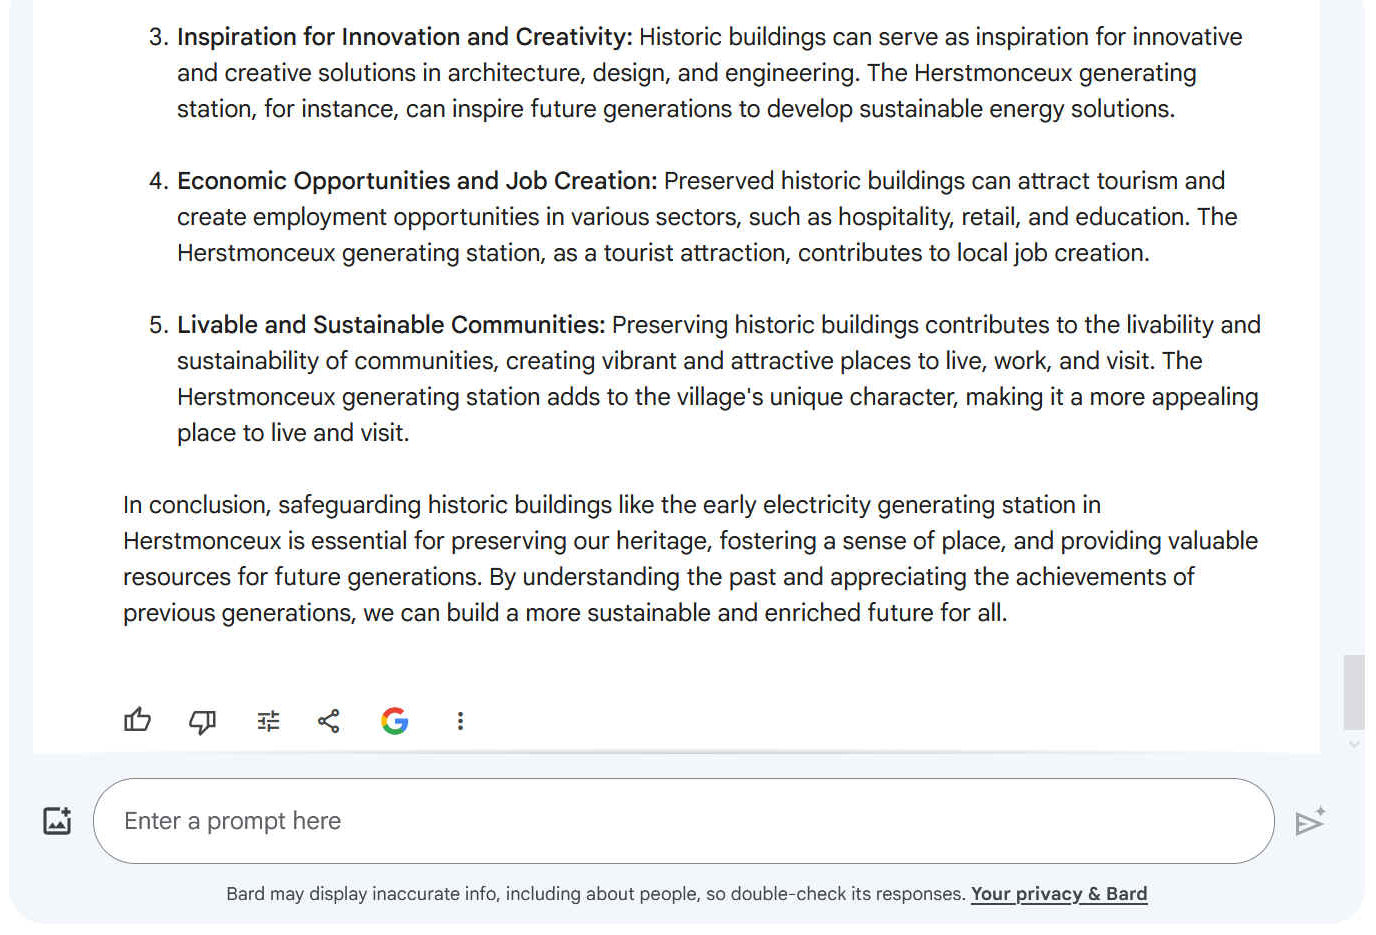 3.    Inspiration for Innovation and Creativity: Historic buildings can serve as inspiration for innovative and creative solutions in architecture, design, and engineering. The Herstmonceux generating station, for instance, can inspire future generations to develop sustainable energy solutions.